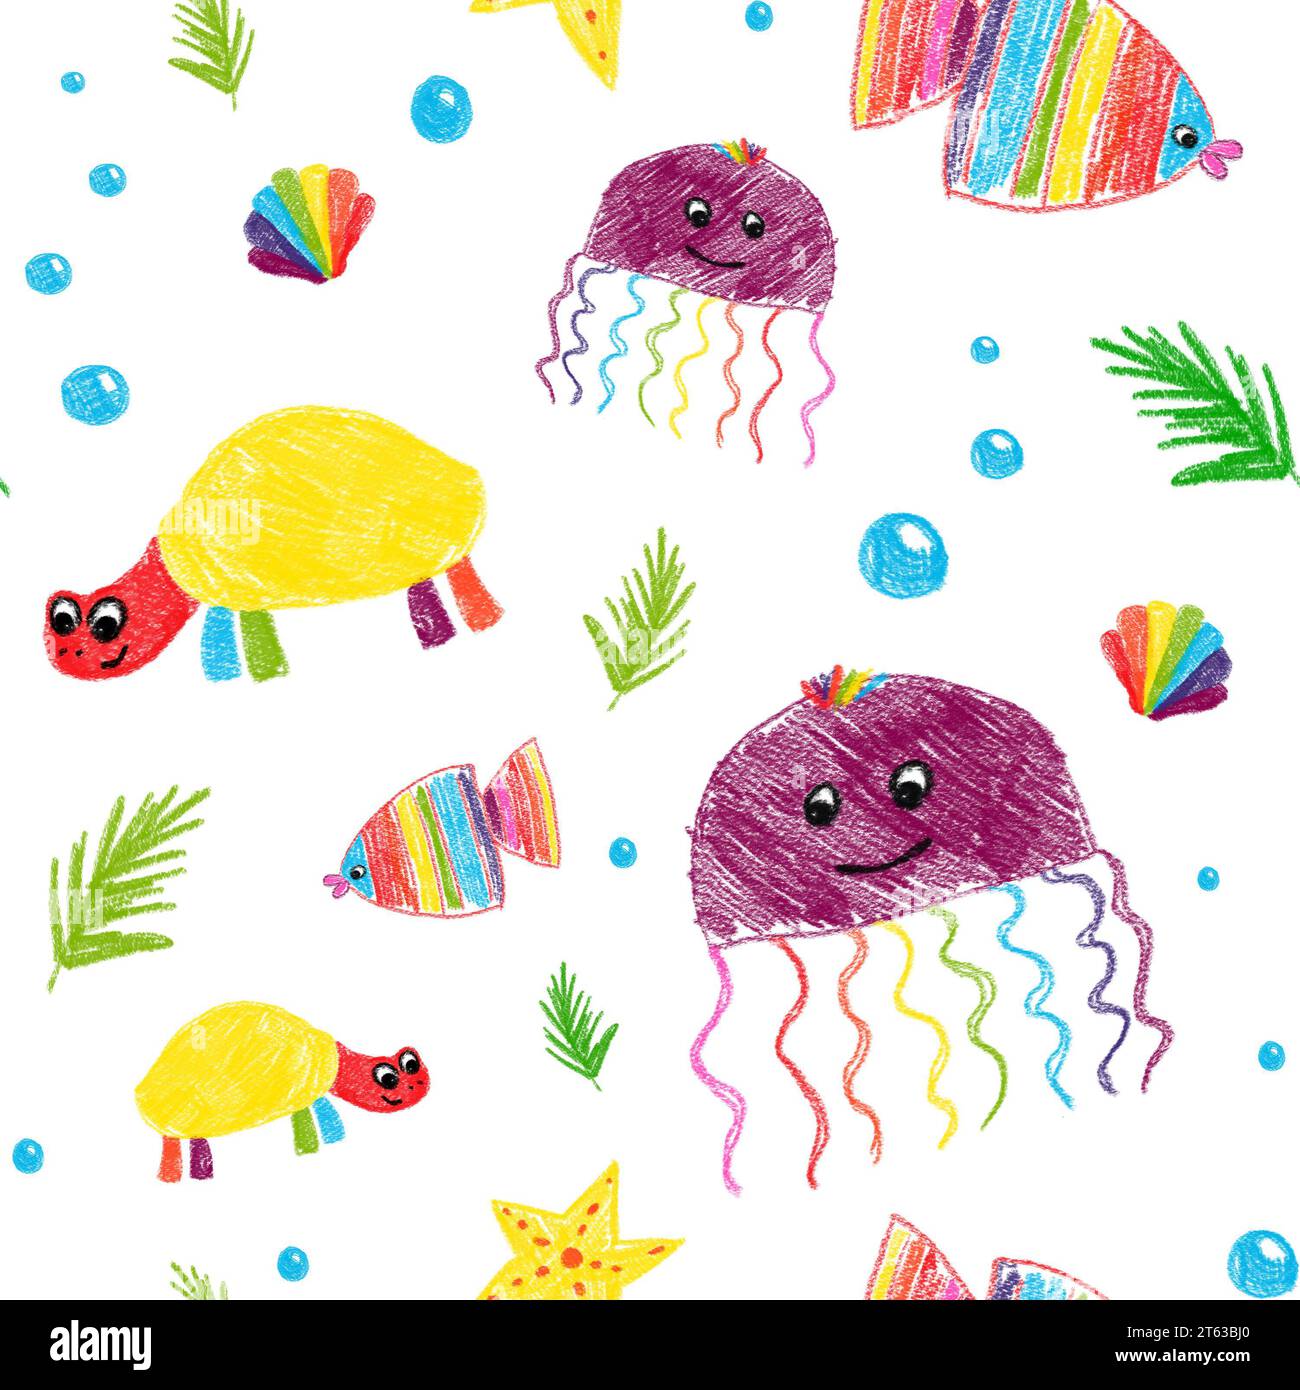 Seamless pattern with hand-drawn ocean animals. White background. Sea children's turtle, jellyfish, fish, shell. Pencil technique. For kid's textile Stock Photo